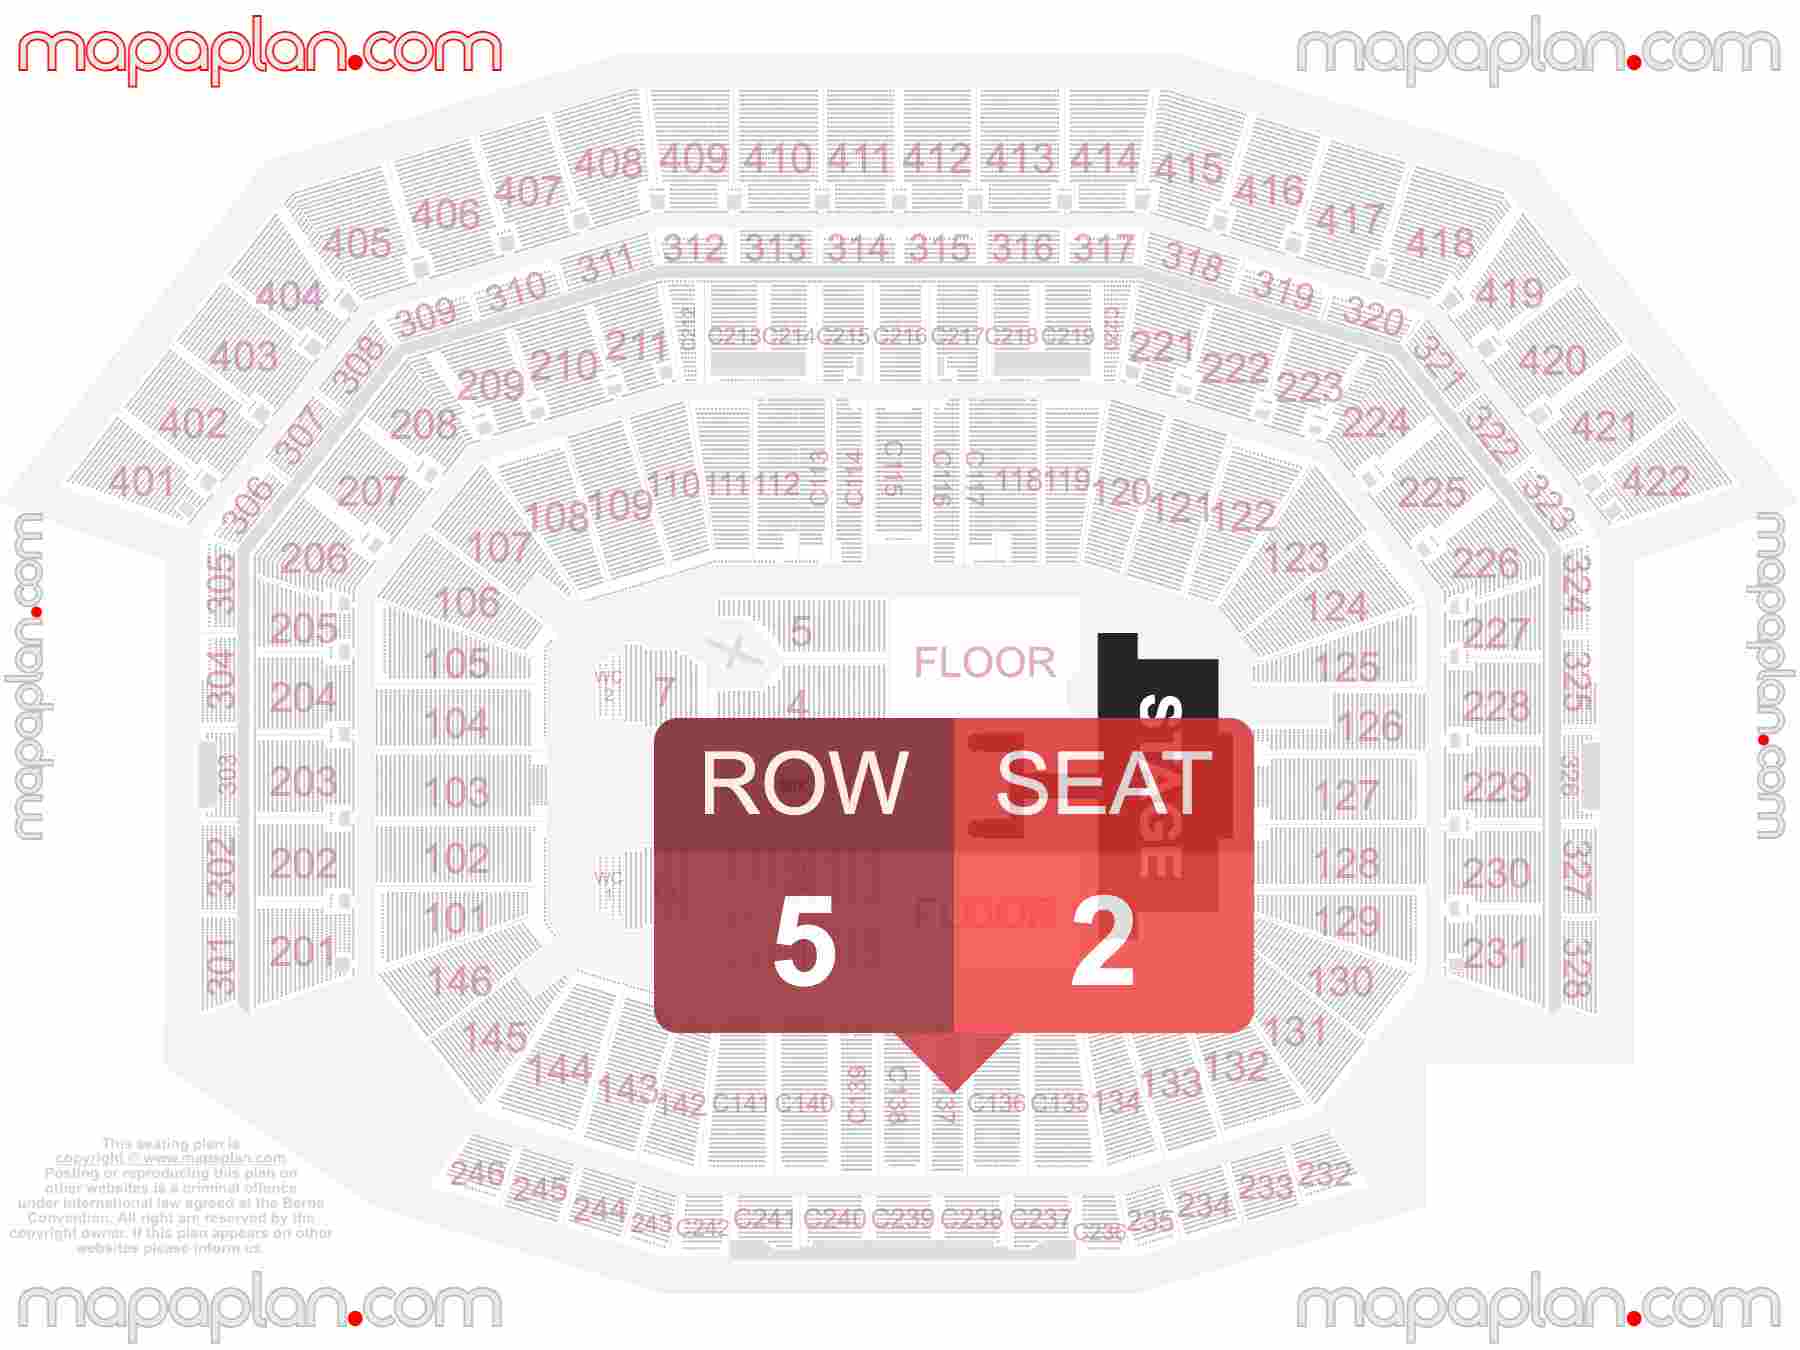 Santa Clara Levi's Stadium seating chart Concert with extended catwalk runway B-stage and PIT floor standing seating chart with exact section numbers showing best rows and seats selection 3d layout - Best interactive seat finder tool with precise detailed location data